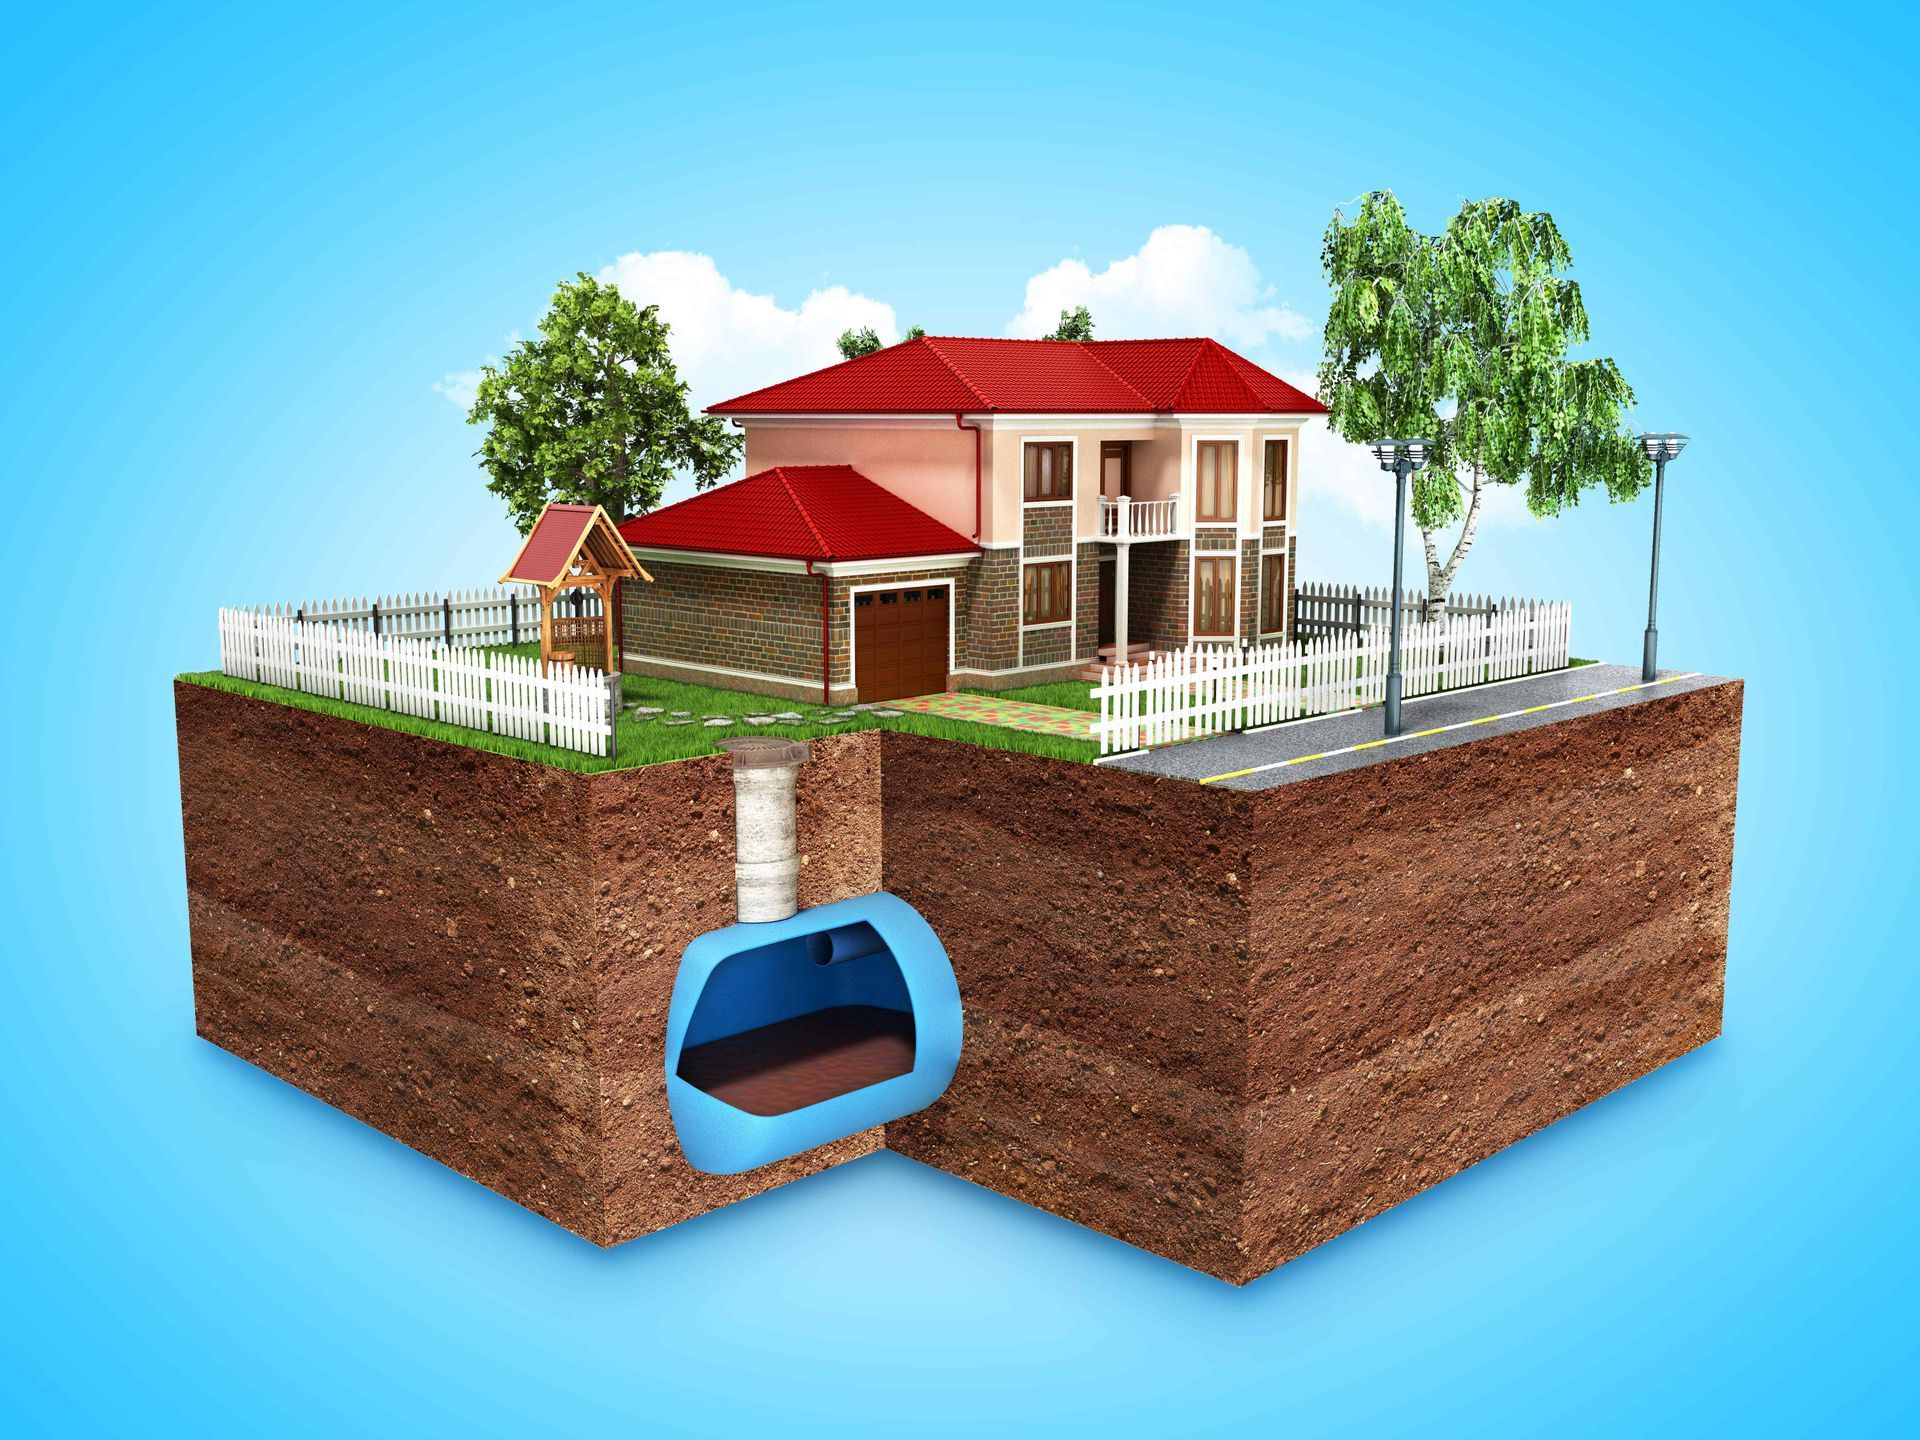 Diagram for considering location of septic tank